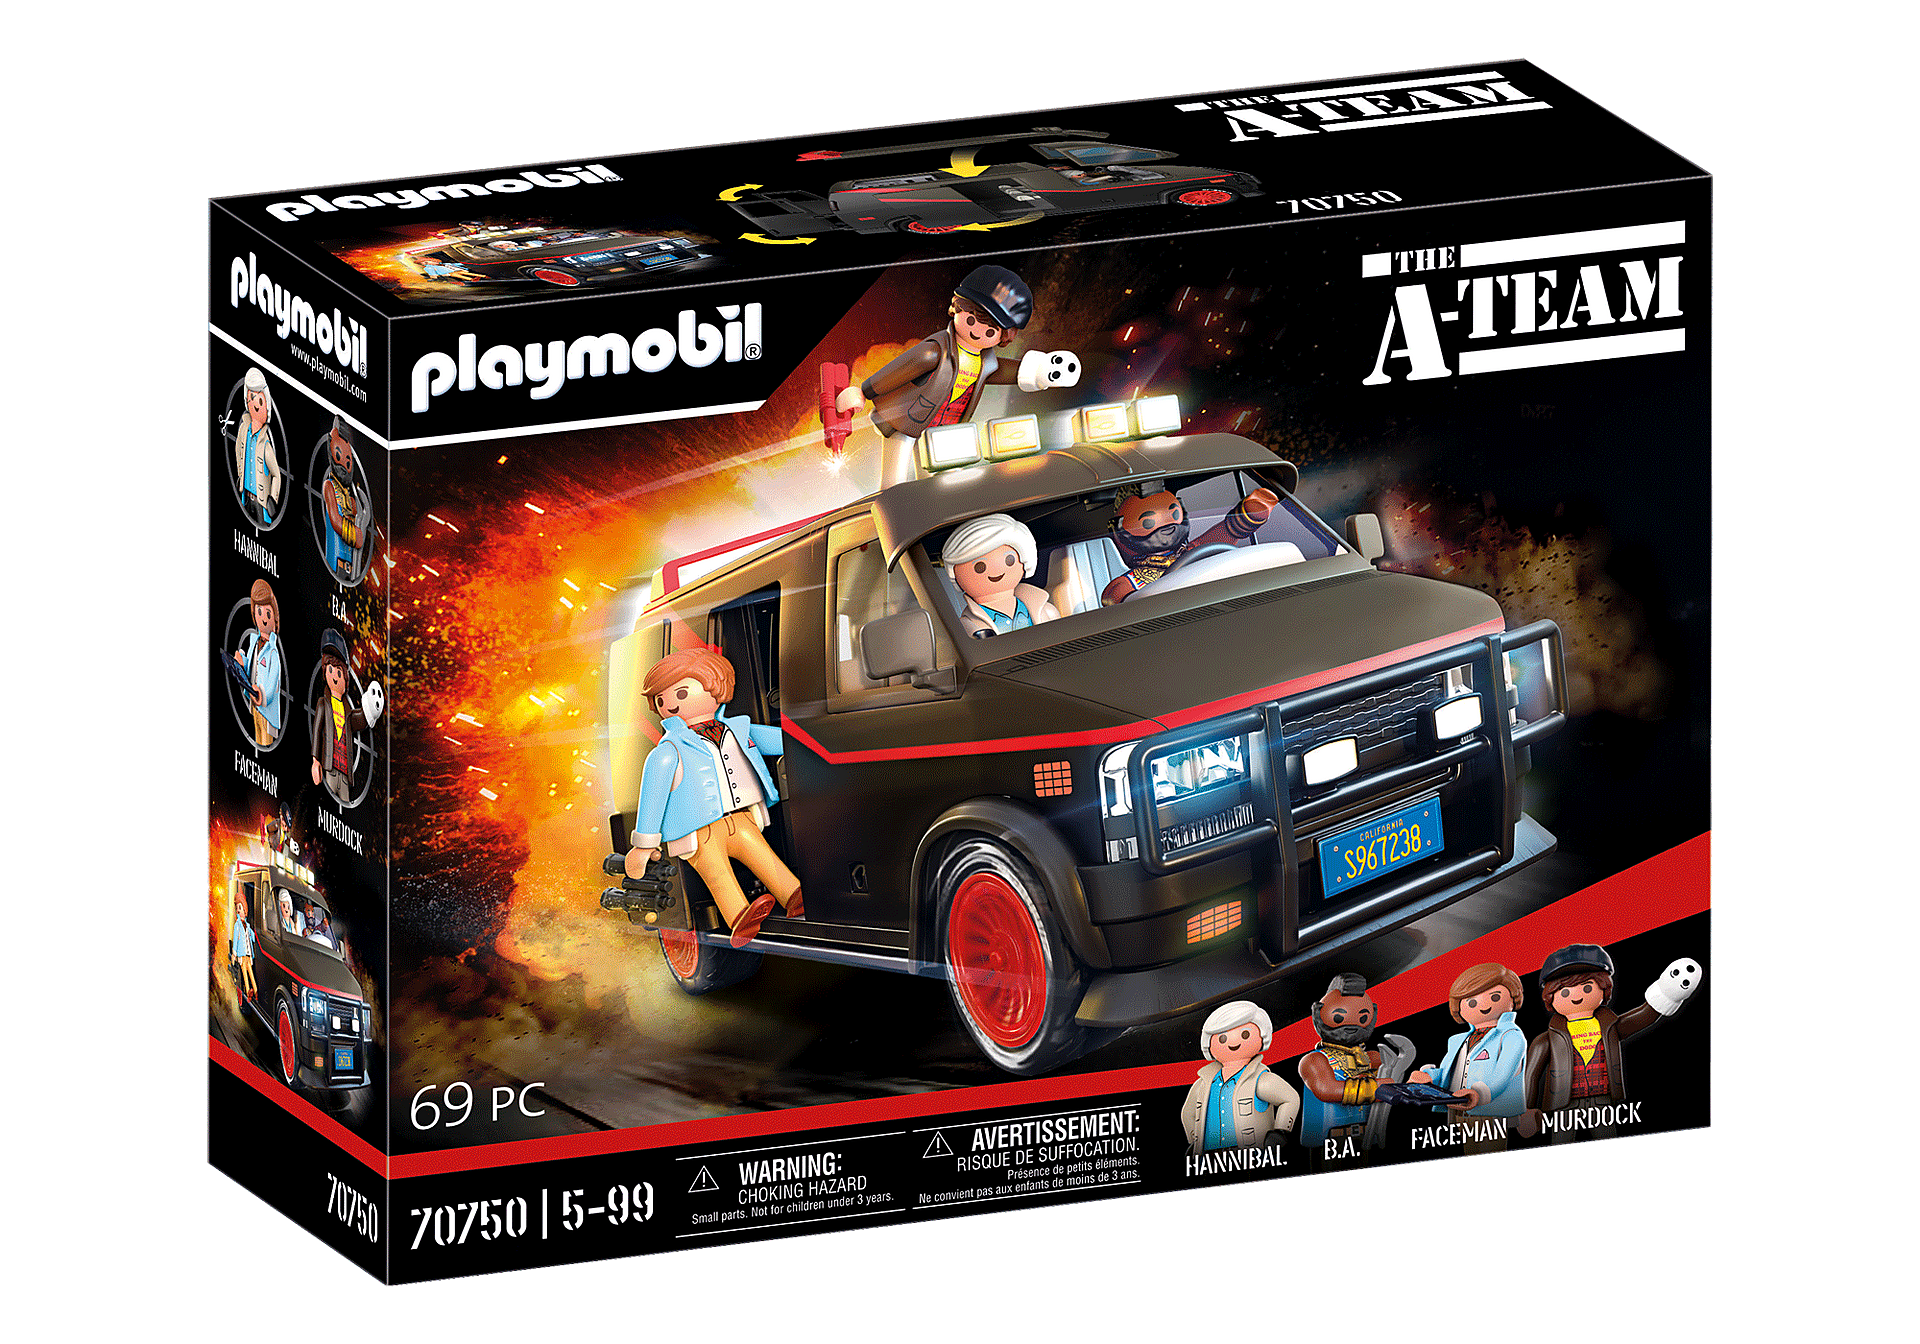 Playmobil Police Helicopter Pursuit with Runaway Van